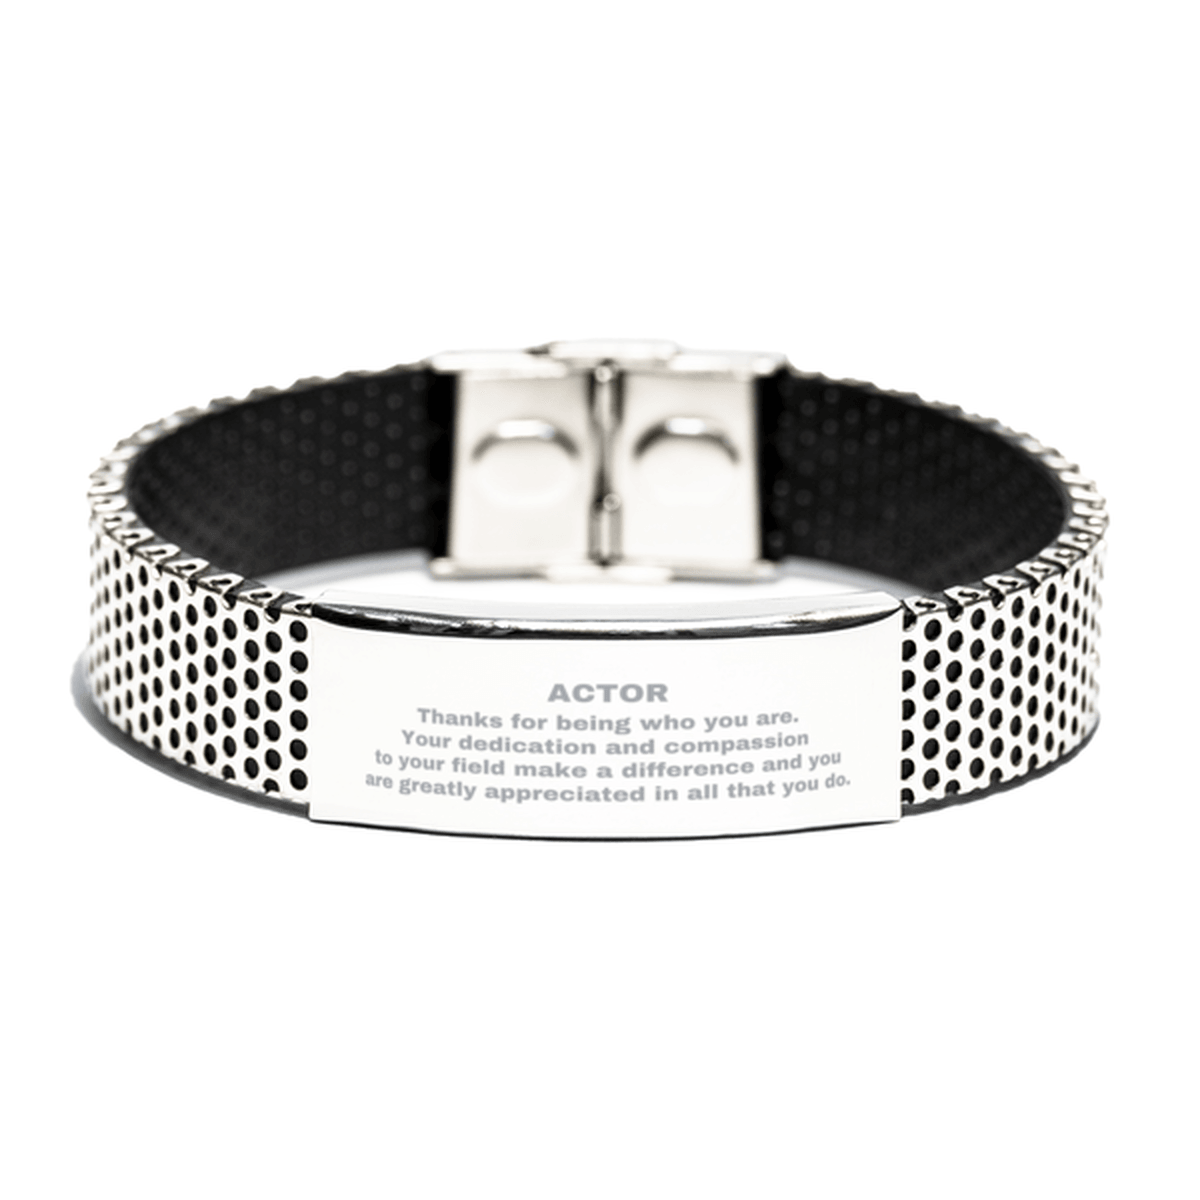 Actor Silver Shark Mesh Stainless Steel Engraved Bracelet - Thanks for being who you are - Birthday Christmas Jewelry Gifts Coworkers Colleague Boss - Mallard Moon Gift Shop